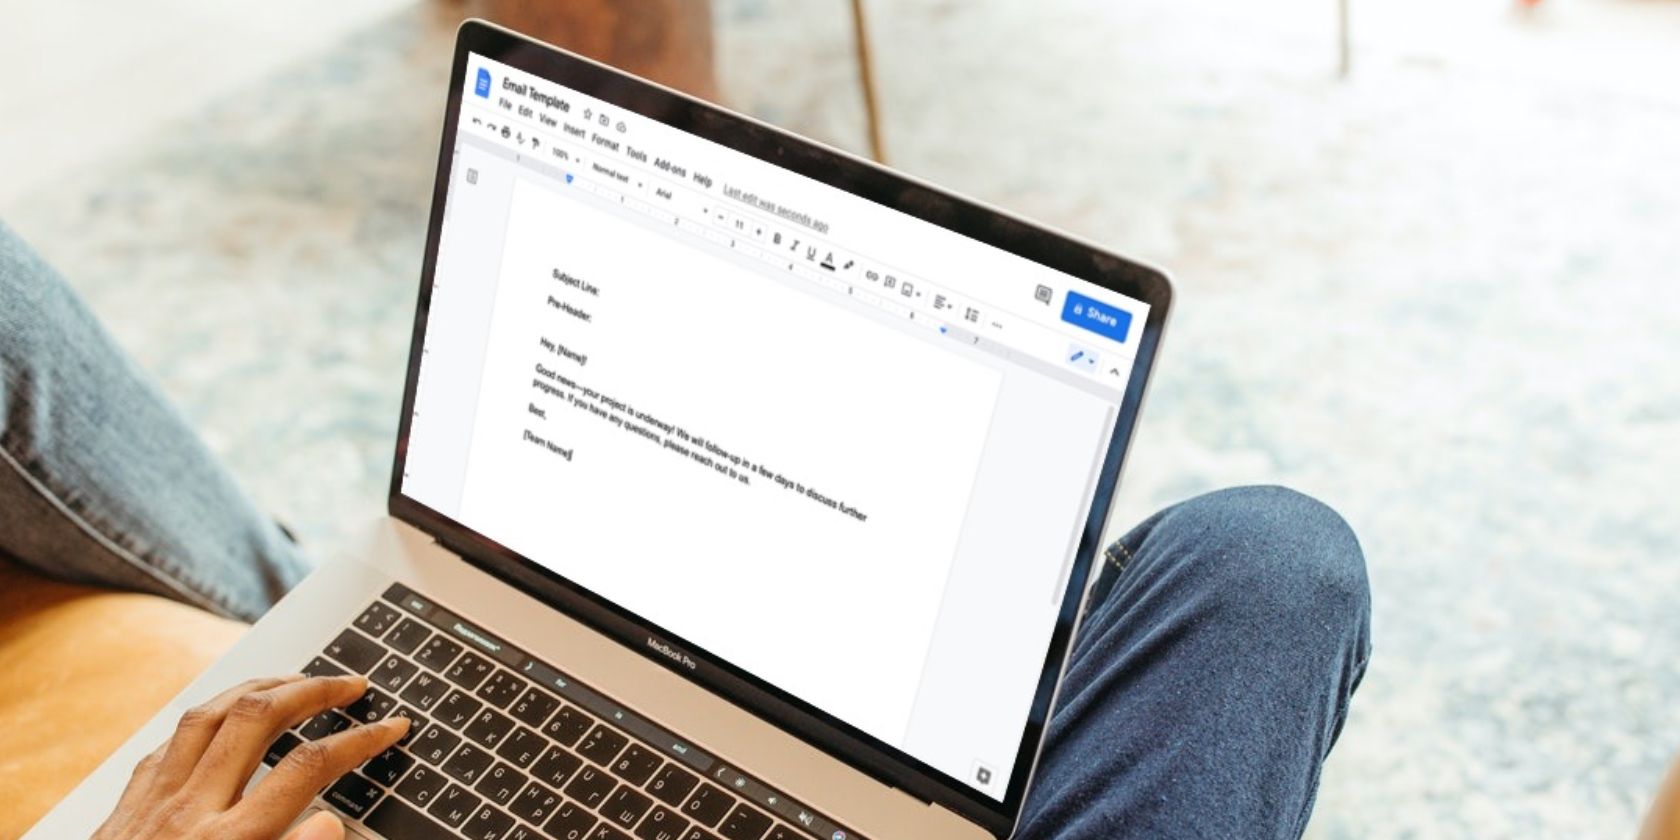 Image shows a man using a Google Docs template on a MacBook